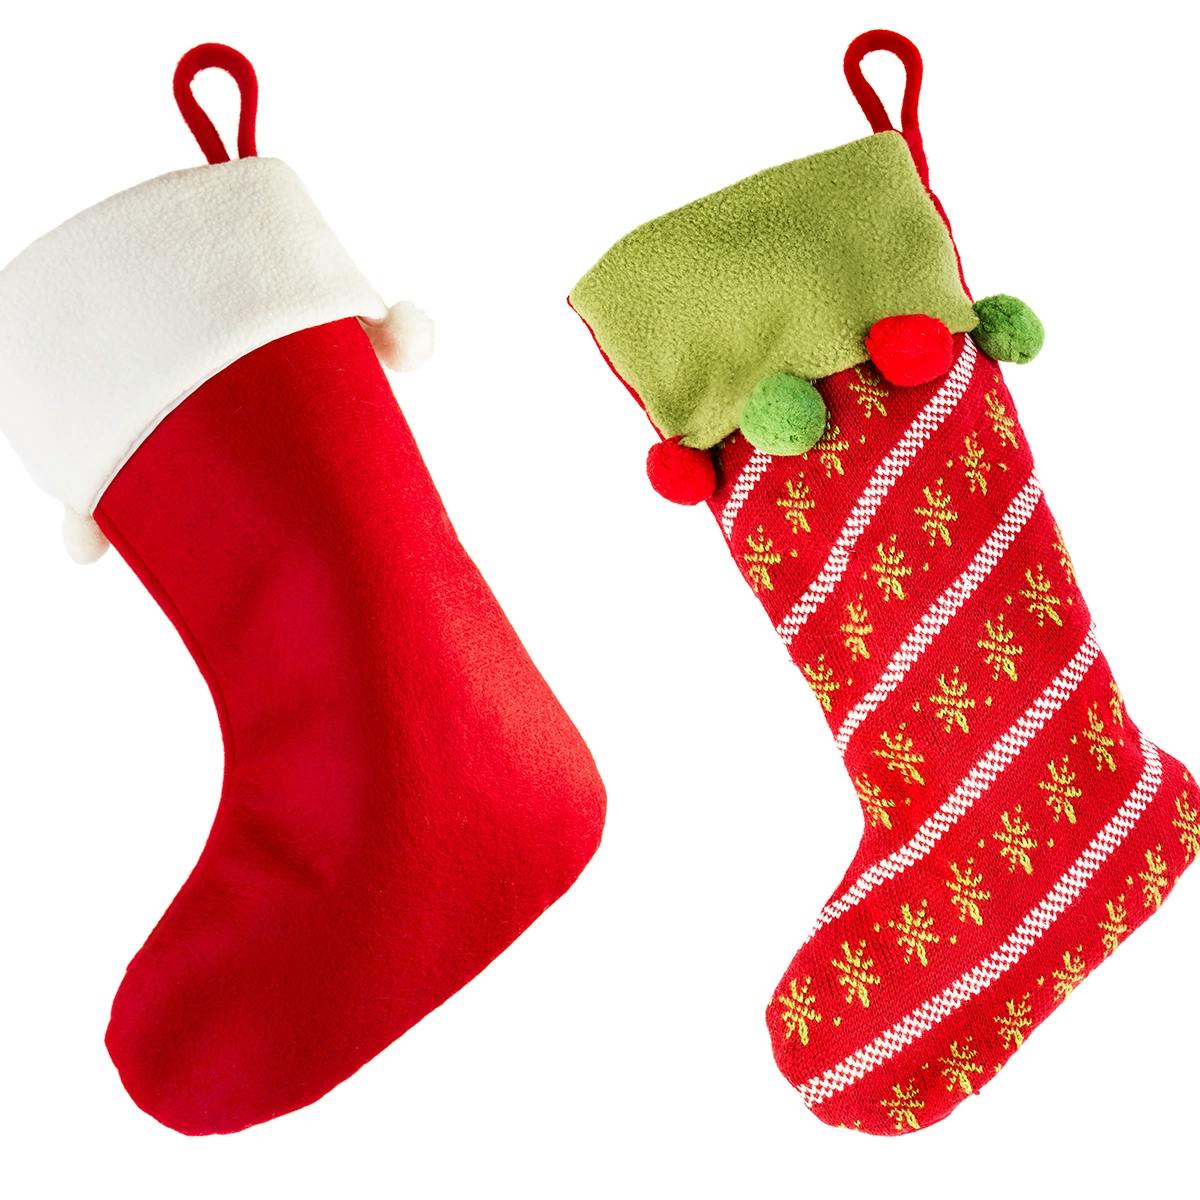 Three festive holiday stockings in red, green and white with red felt loops for hanging.